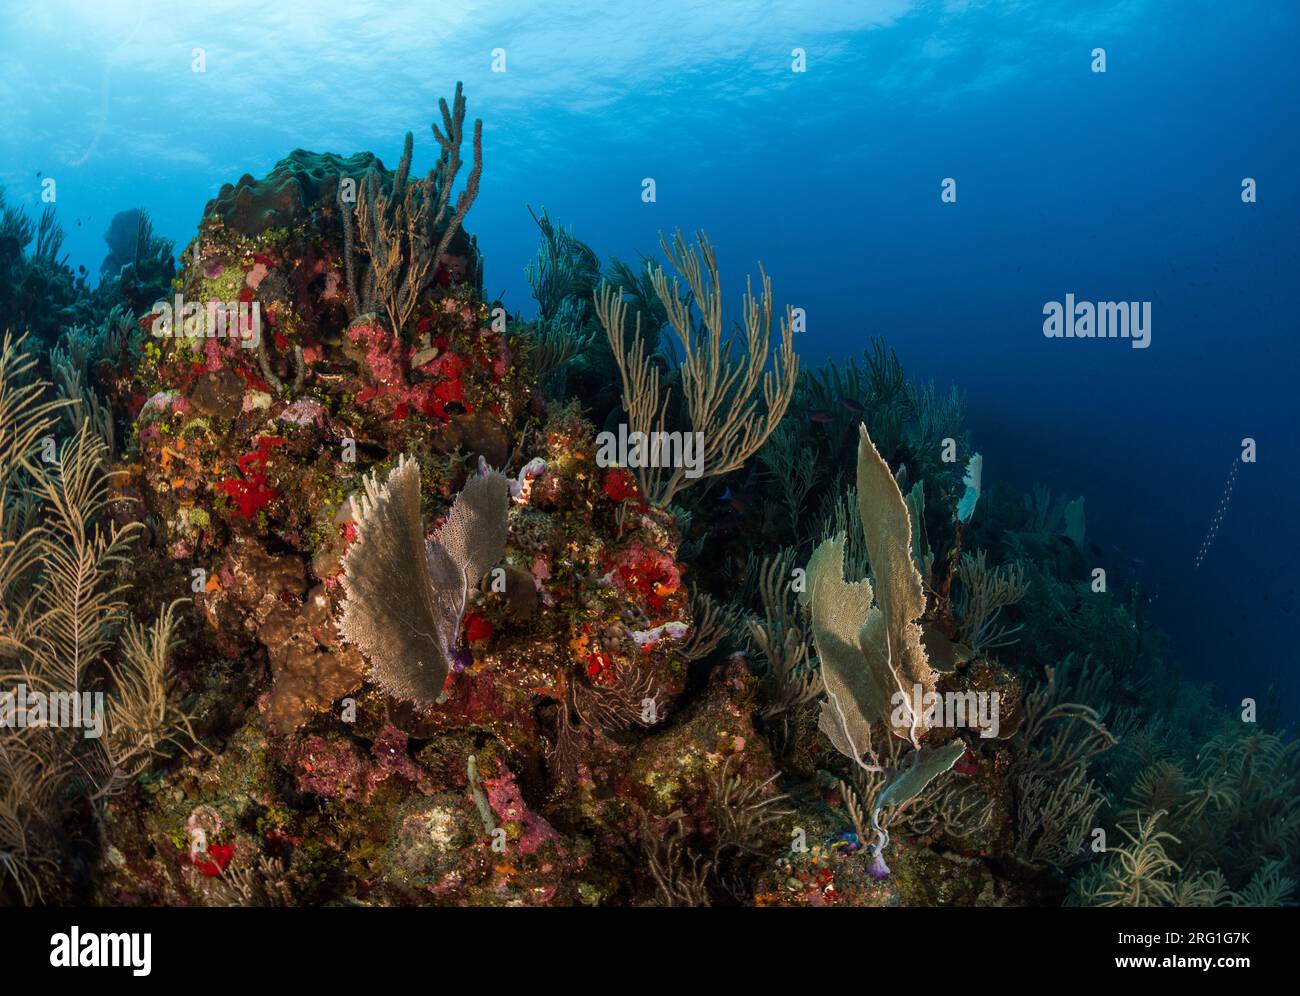 Reefscape featuring sea fans and soft & hard corals in Utila, Honduras Stock Photo